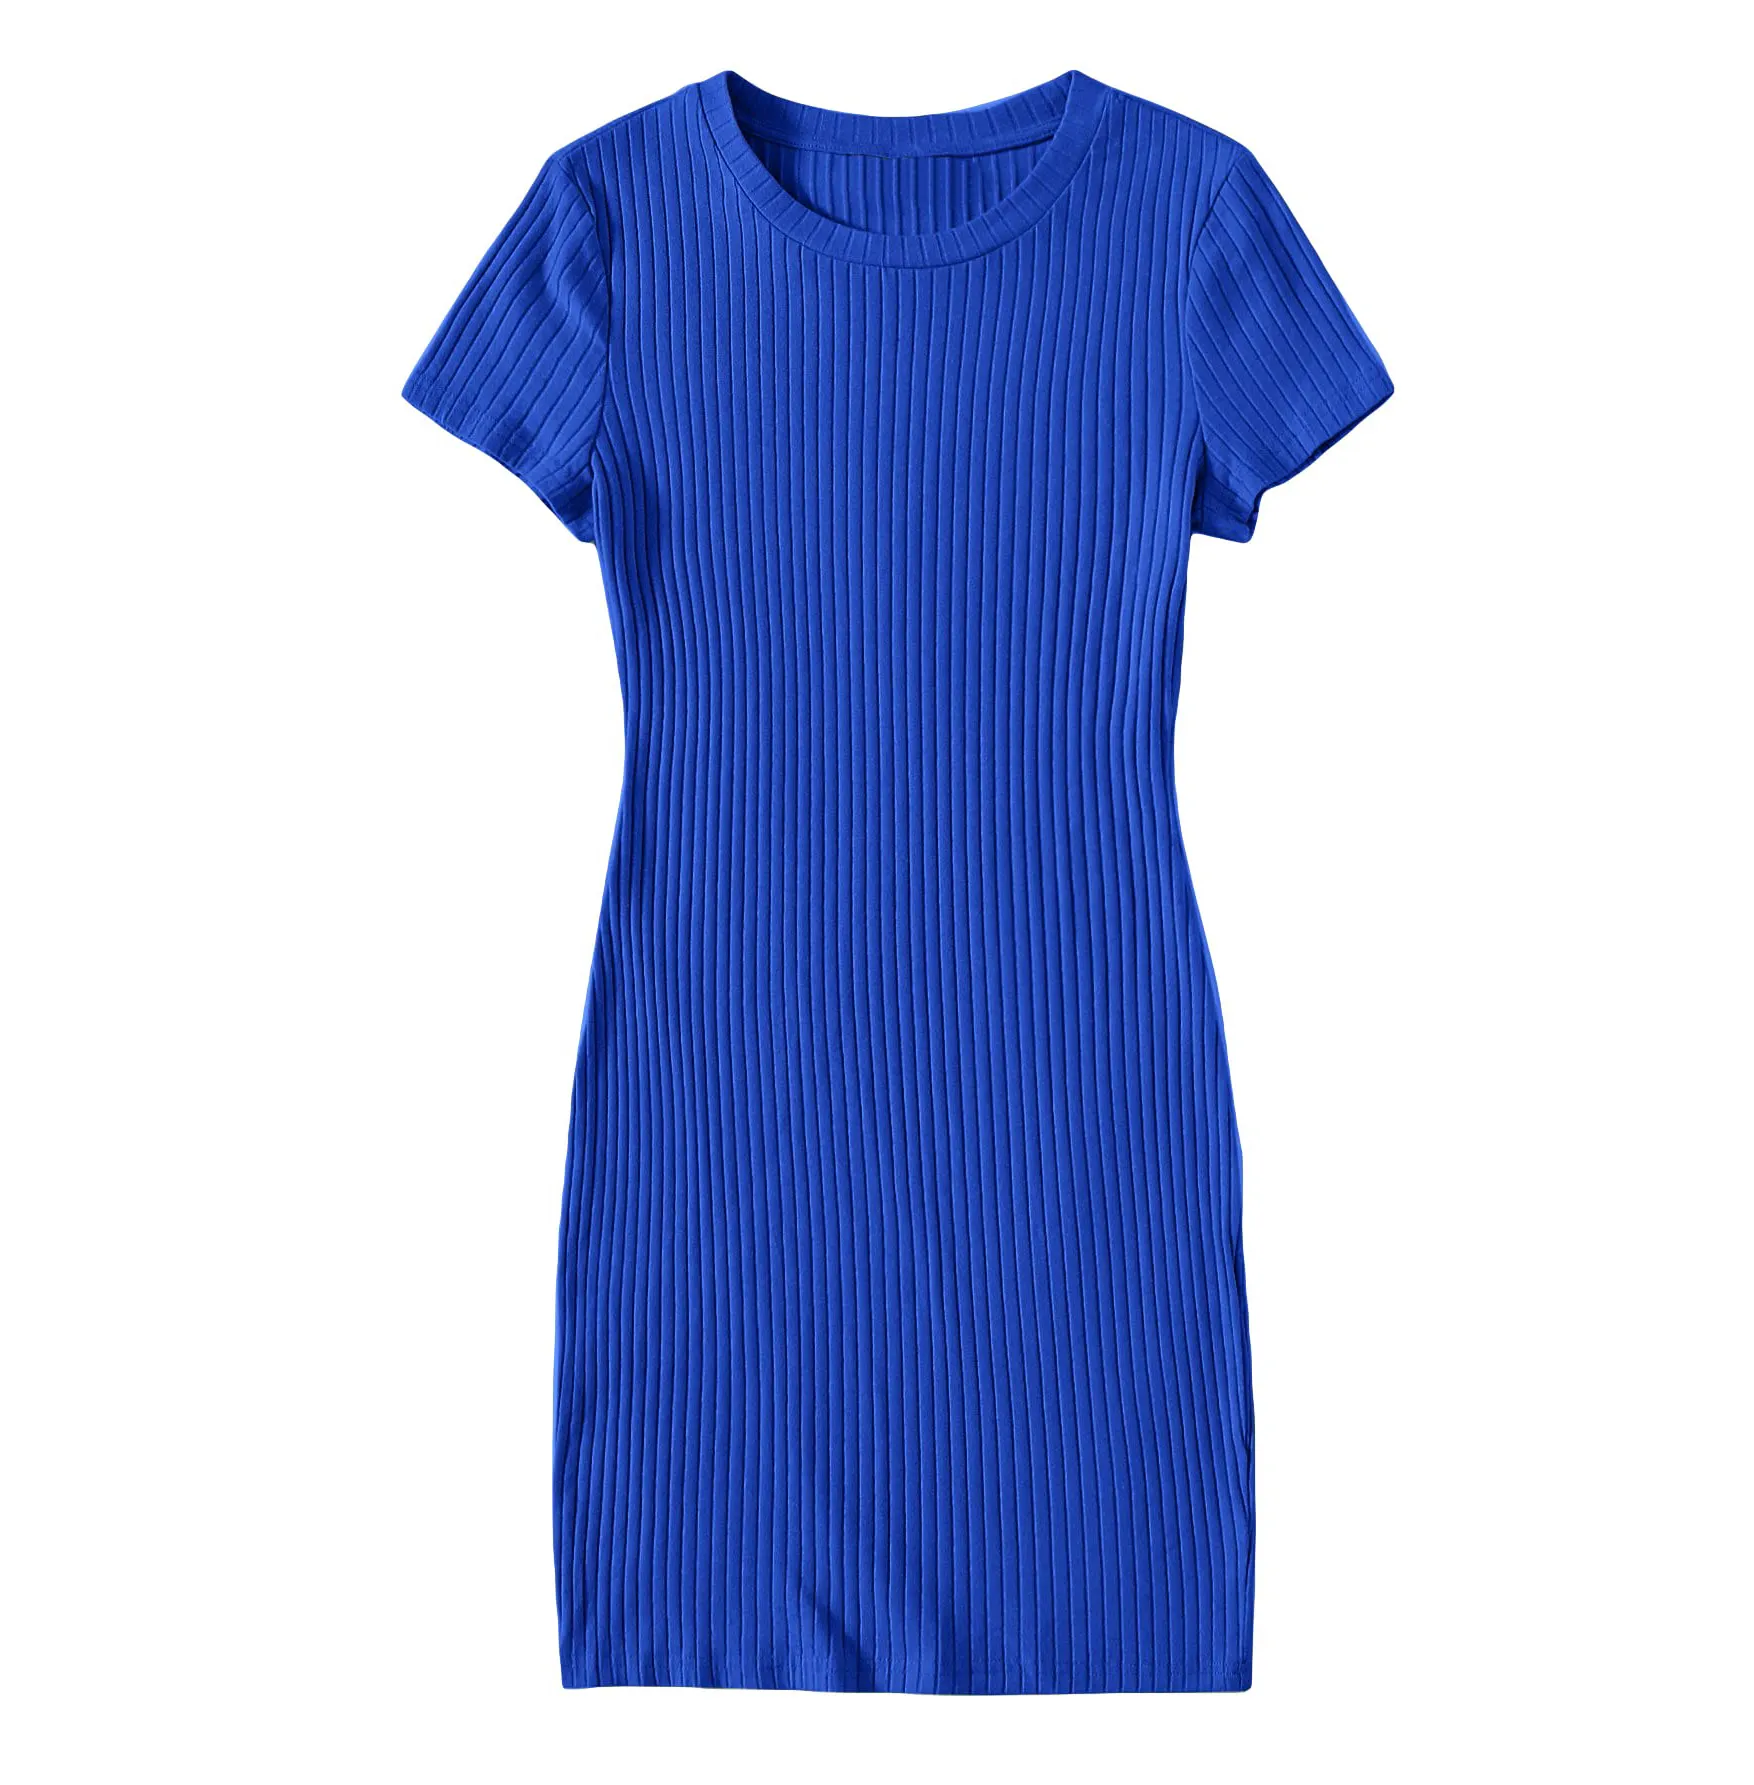 wholesale high quality cotton spandex Women's round Neck Short Sleeve Knit ribbed slim fit Dress